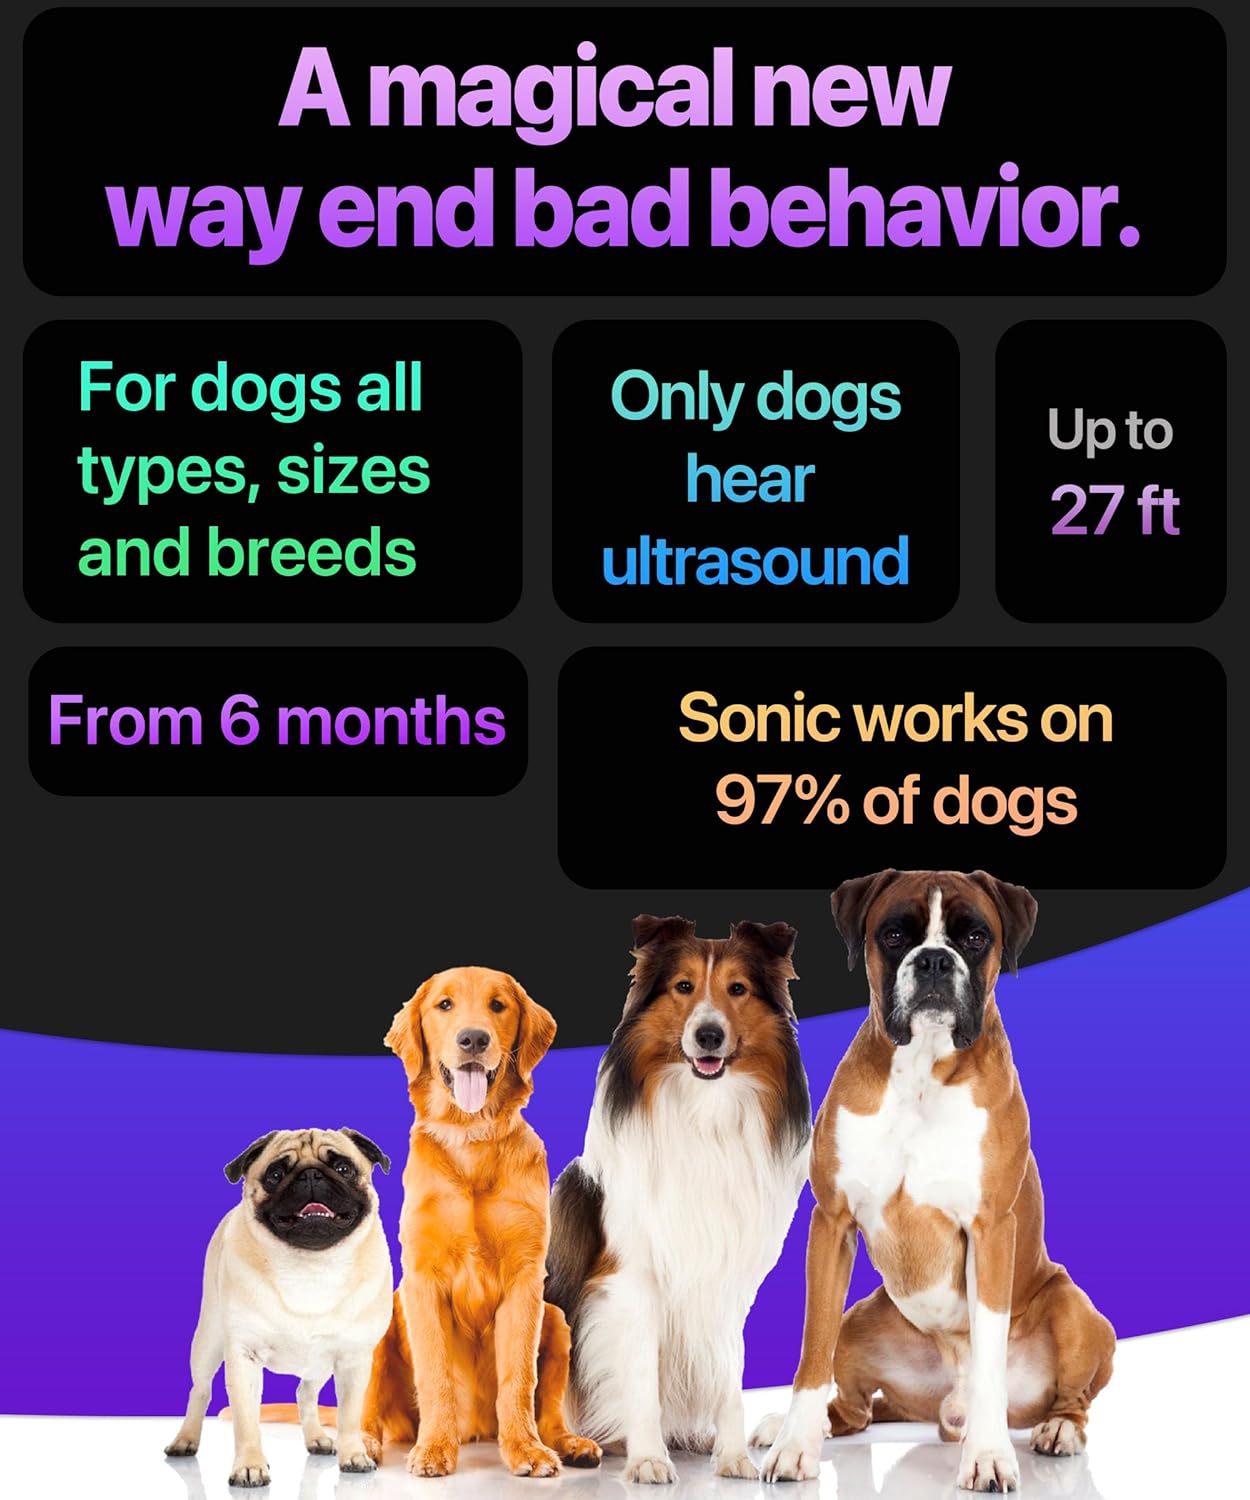 2024release Dog Bark Deterrent Device Stops Bad Behavior | No need yell or swat, Just point to a dog (own or neighbors) Hit the button | Long-range ultrasonic, Alternative to painful dog shock collar